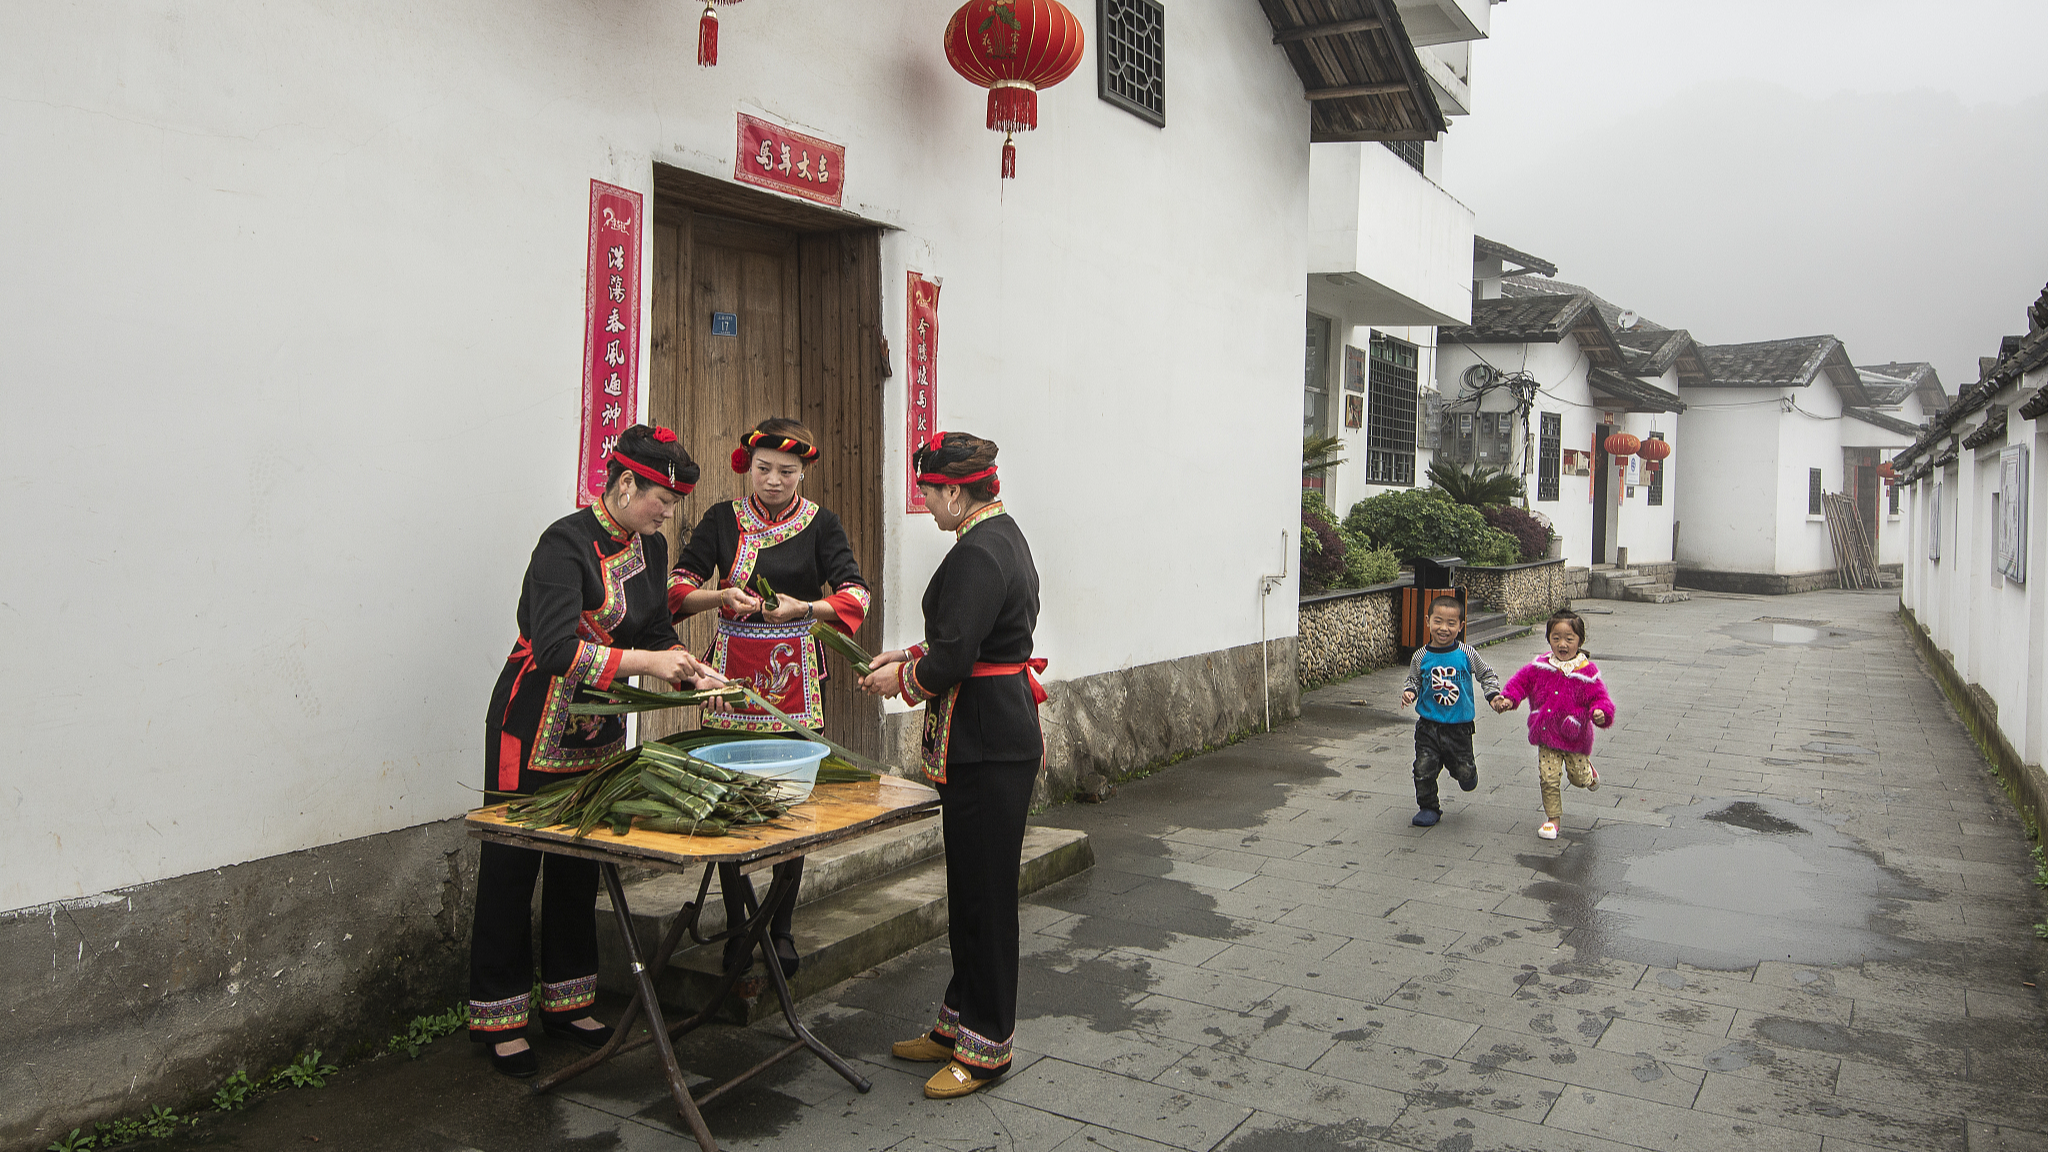 She people are pictured making food in Ningde City, southeast China's Fujian Province, on March 29, 2014. /CFP